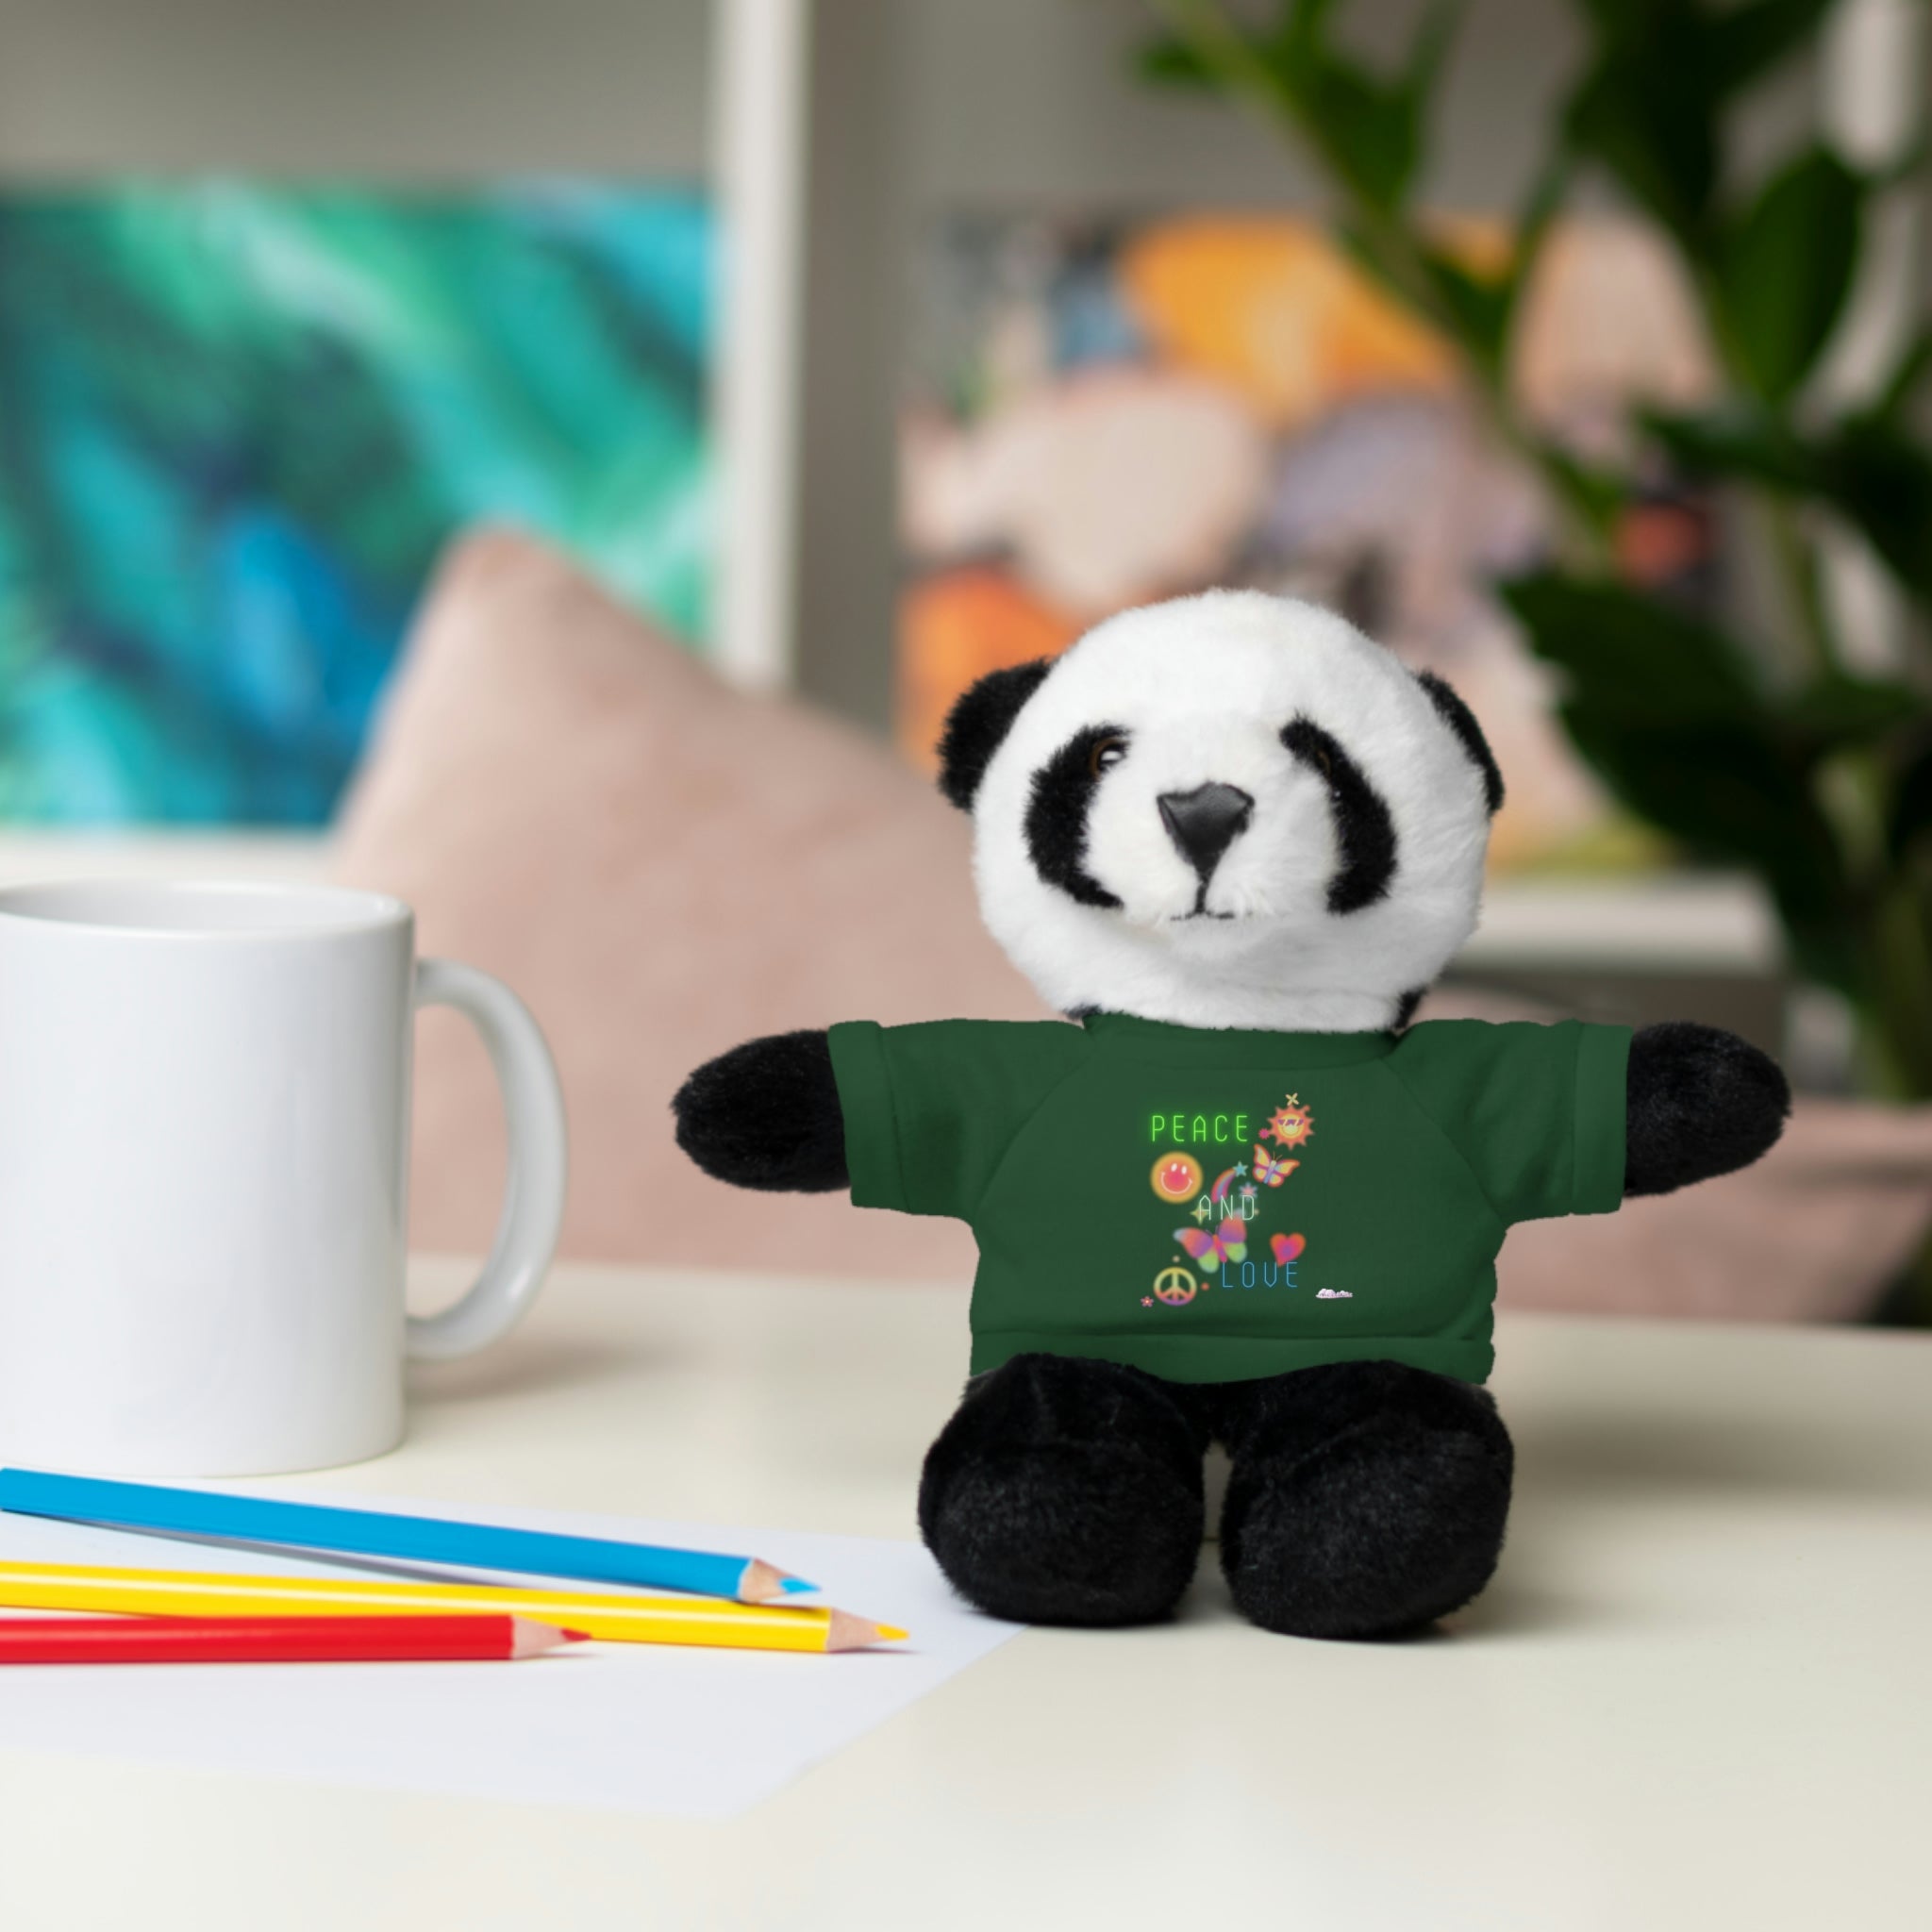 Joyful Friends - Personalized Stuffed Animals with Tee by Pink Clouds